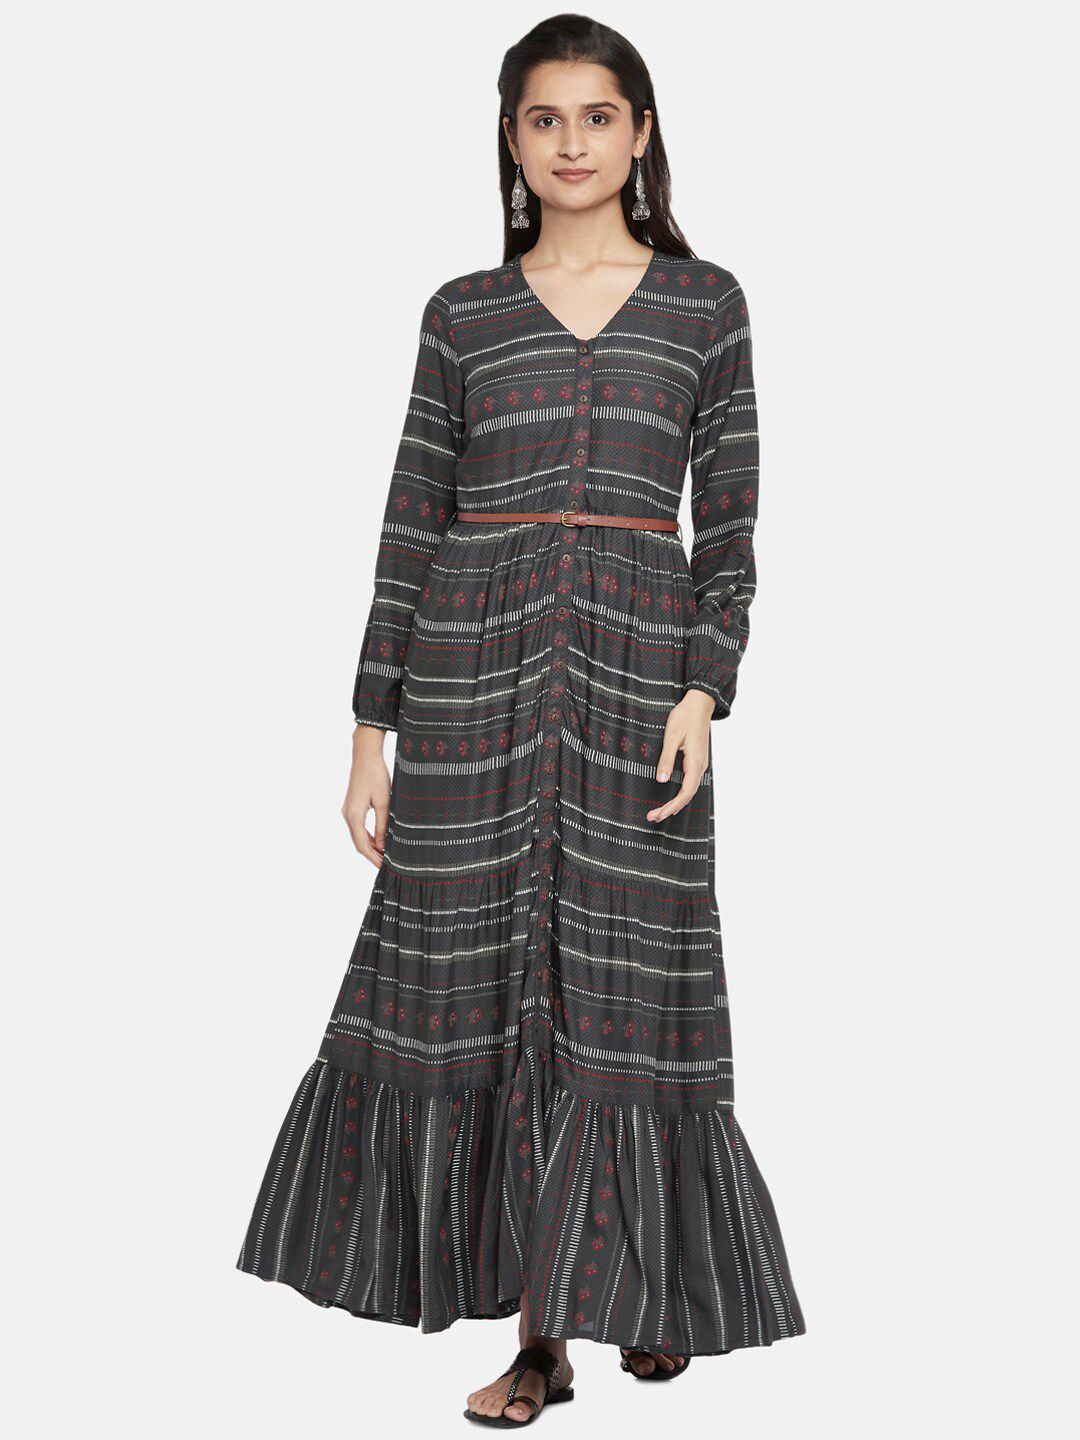 AKKRITI BY PANTALOONS Charcoal Striped A-Line Maxi Dress Price in India